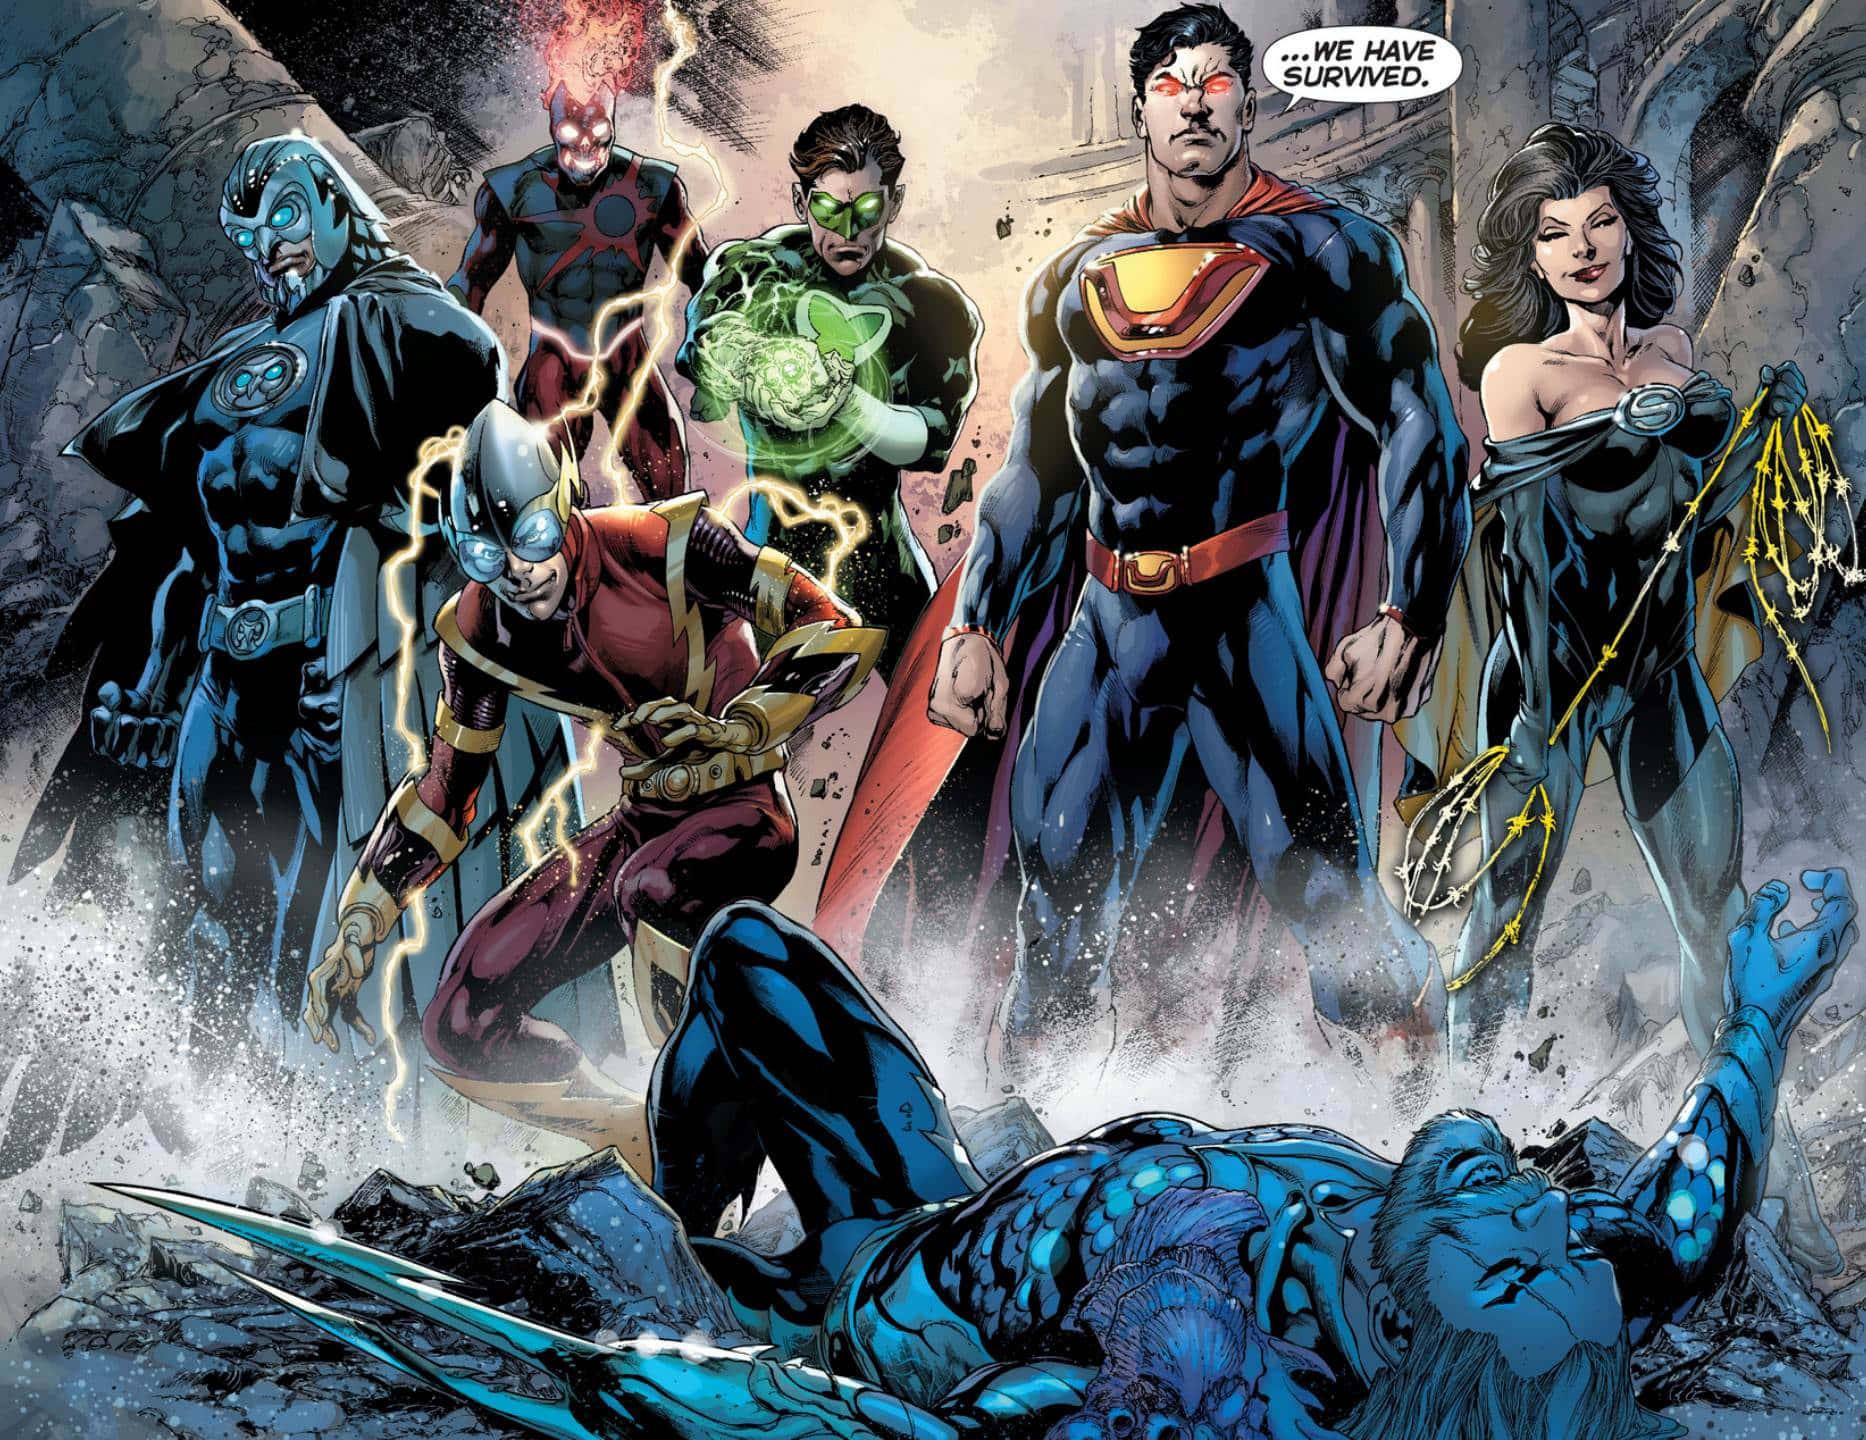 Johnny Quick and the Crime Syndicate in Action Wallpaper